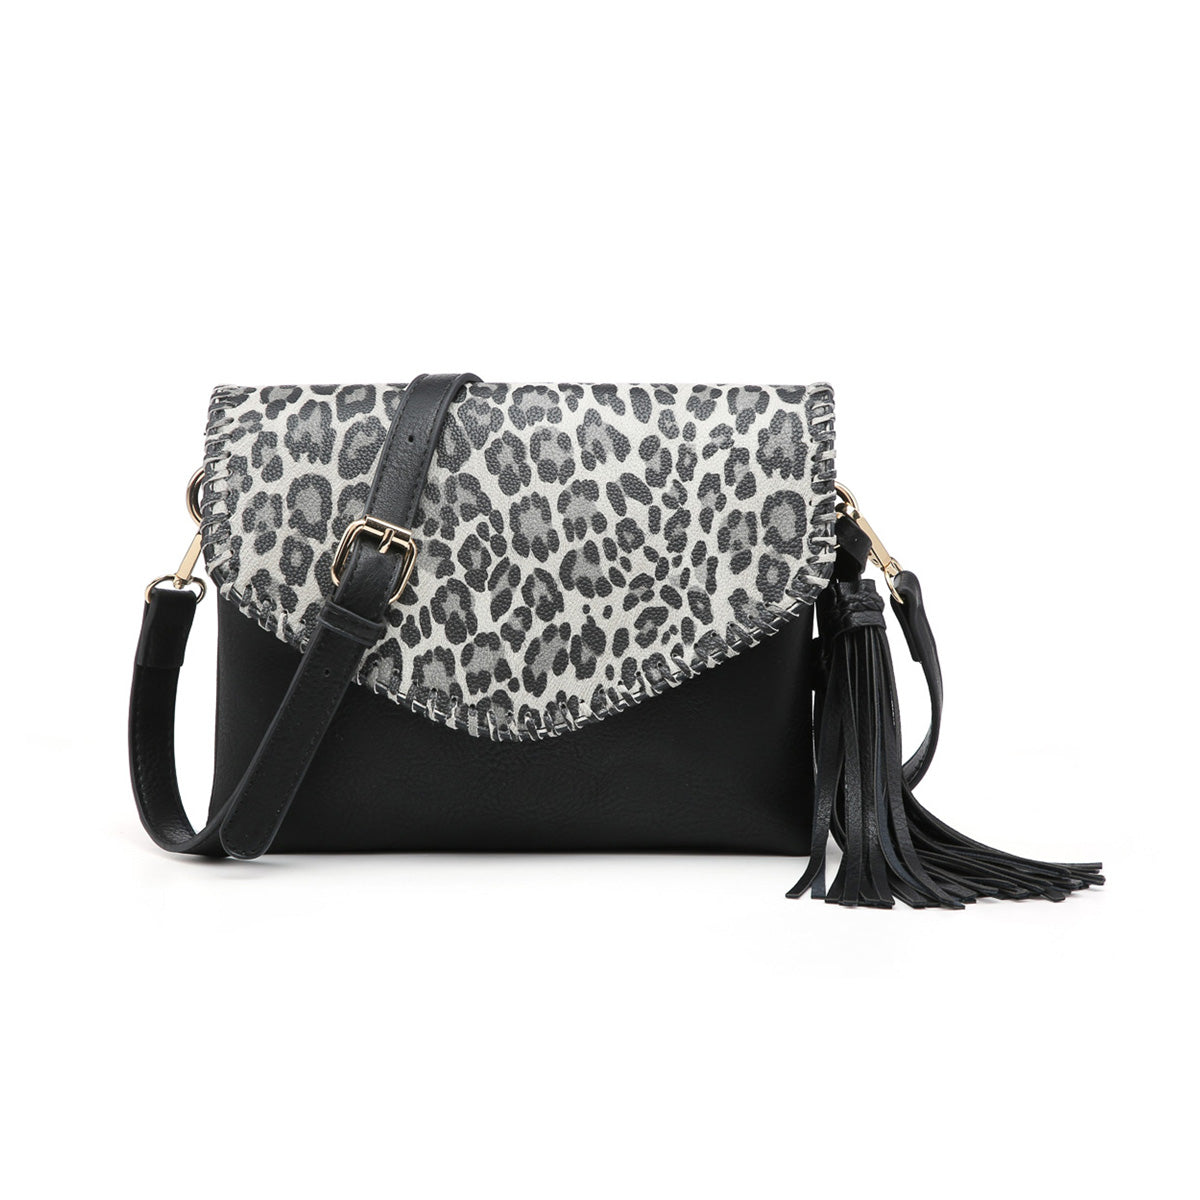 Sloane Flapover Crossbody w/ Whipstitch and Tassel - Cheetah-Black - Southern Grace Creations